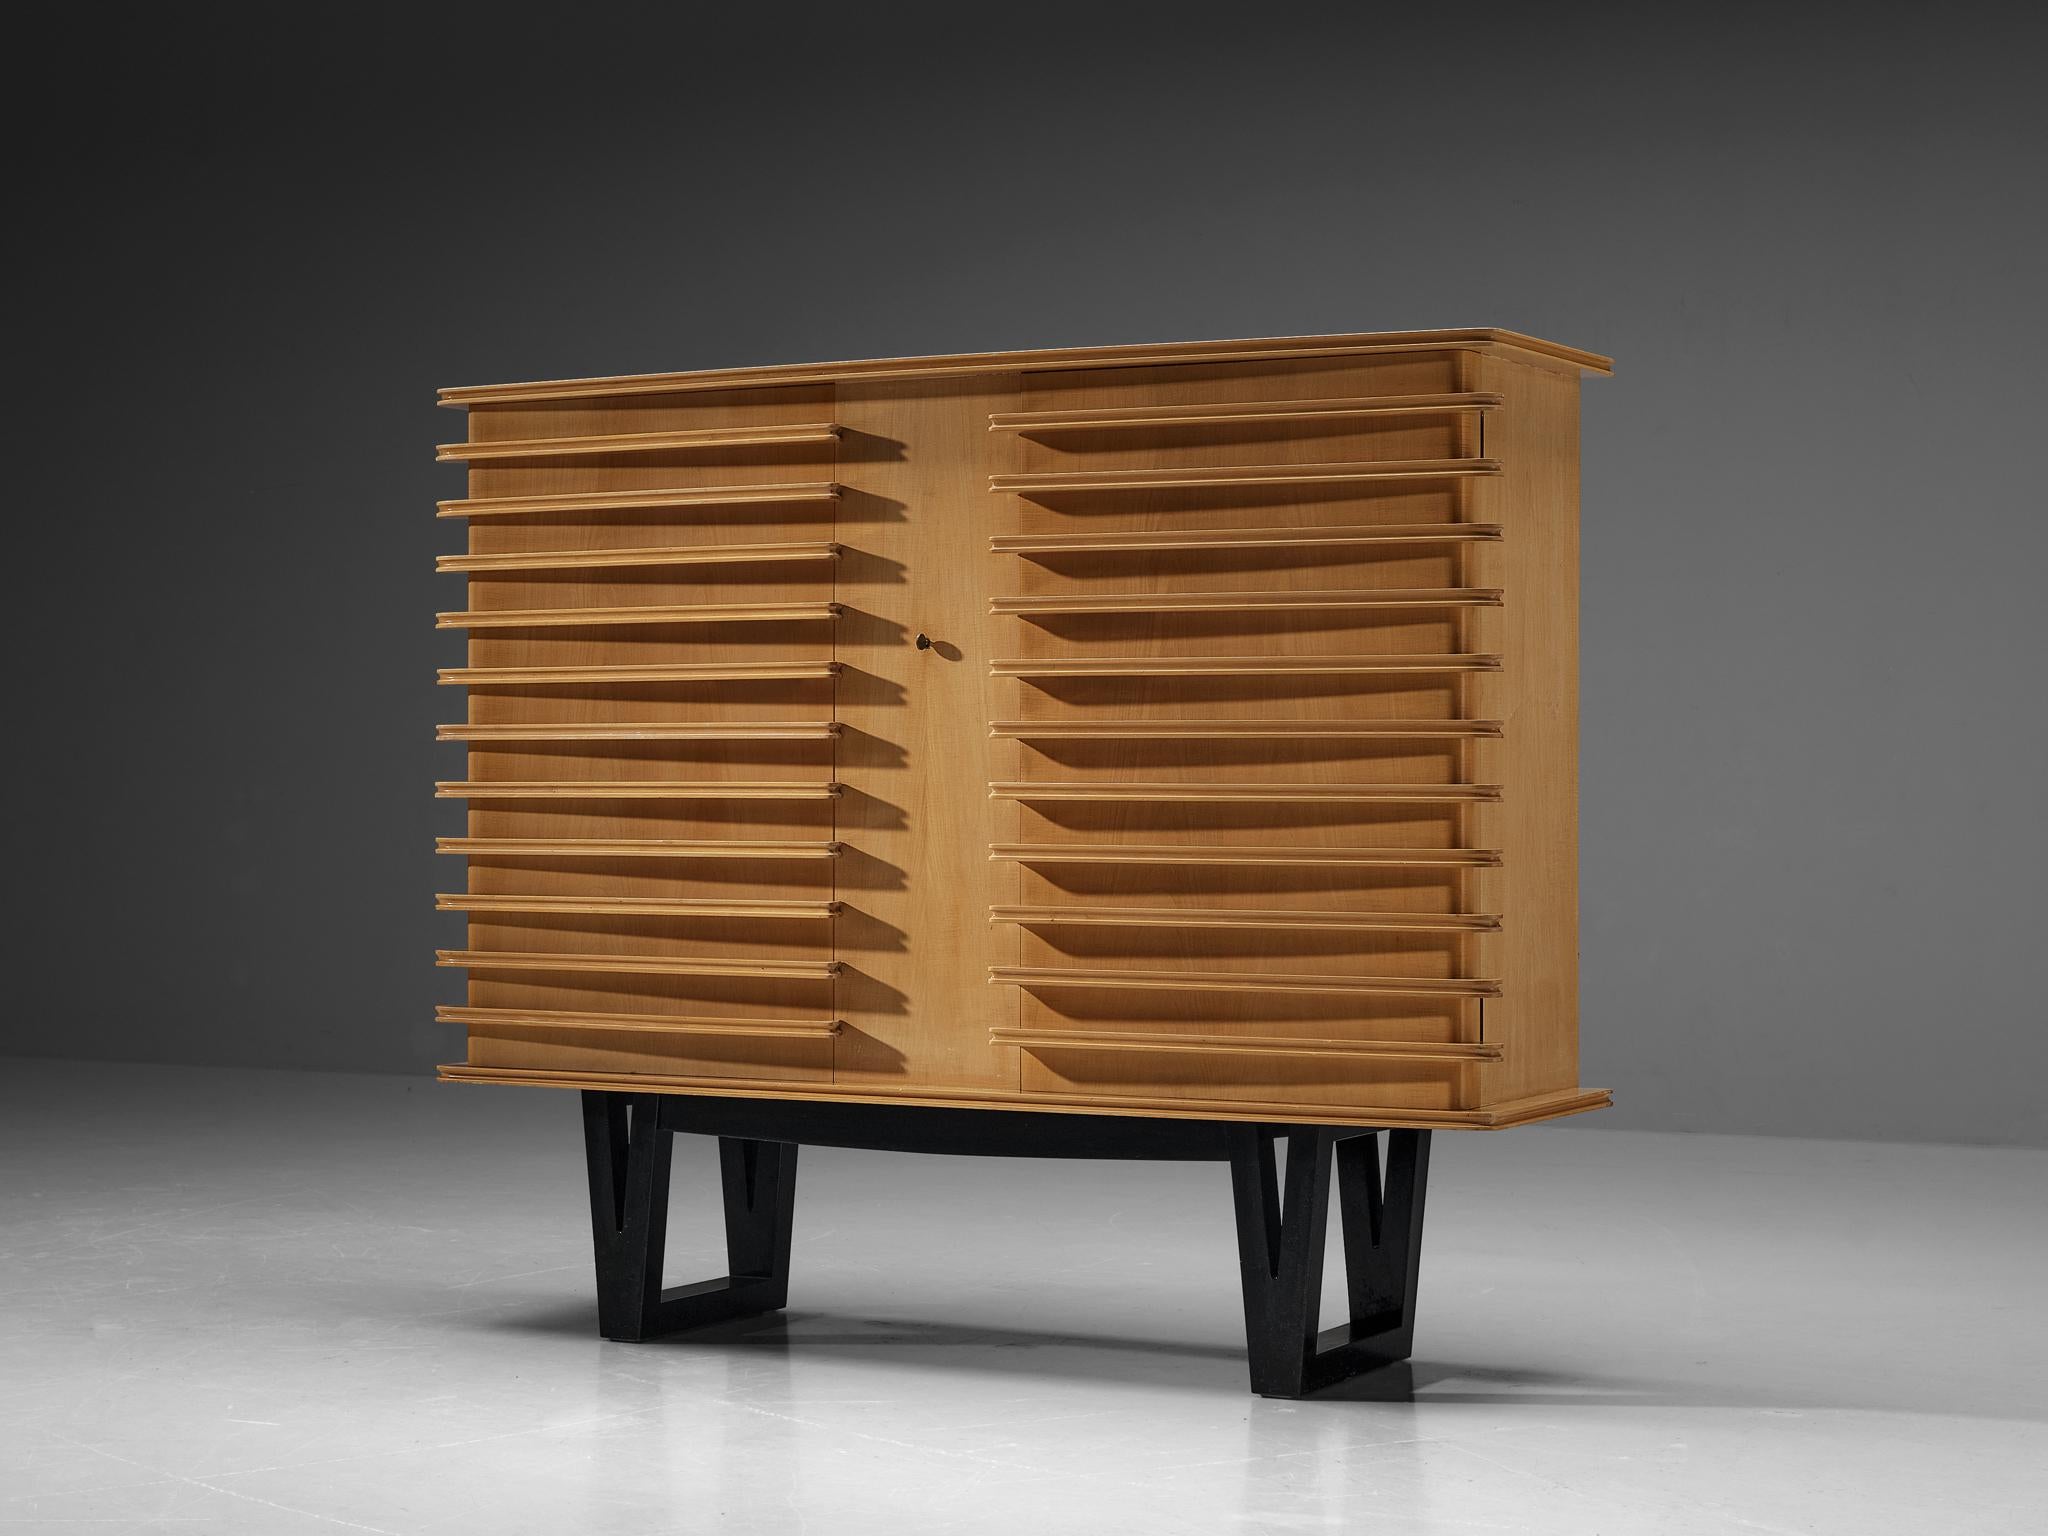 Raoul Clement and R. Verot, cabinet, varnished sycamore, dark stained wood, France, 1955

This rare cabinet is designed by French cabinetmaker Paul Clément et R. Verot and was presented at the 'Salon des arts household' in 1955. With regard to its